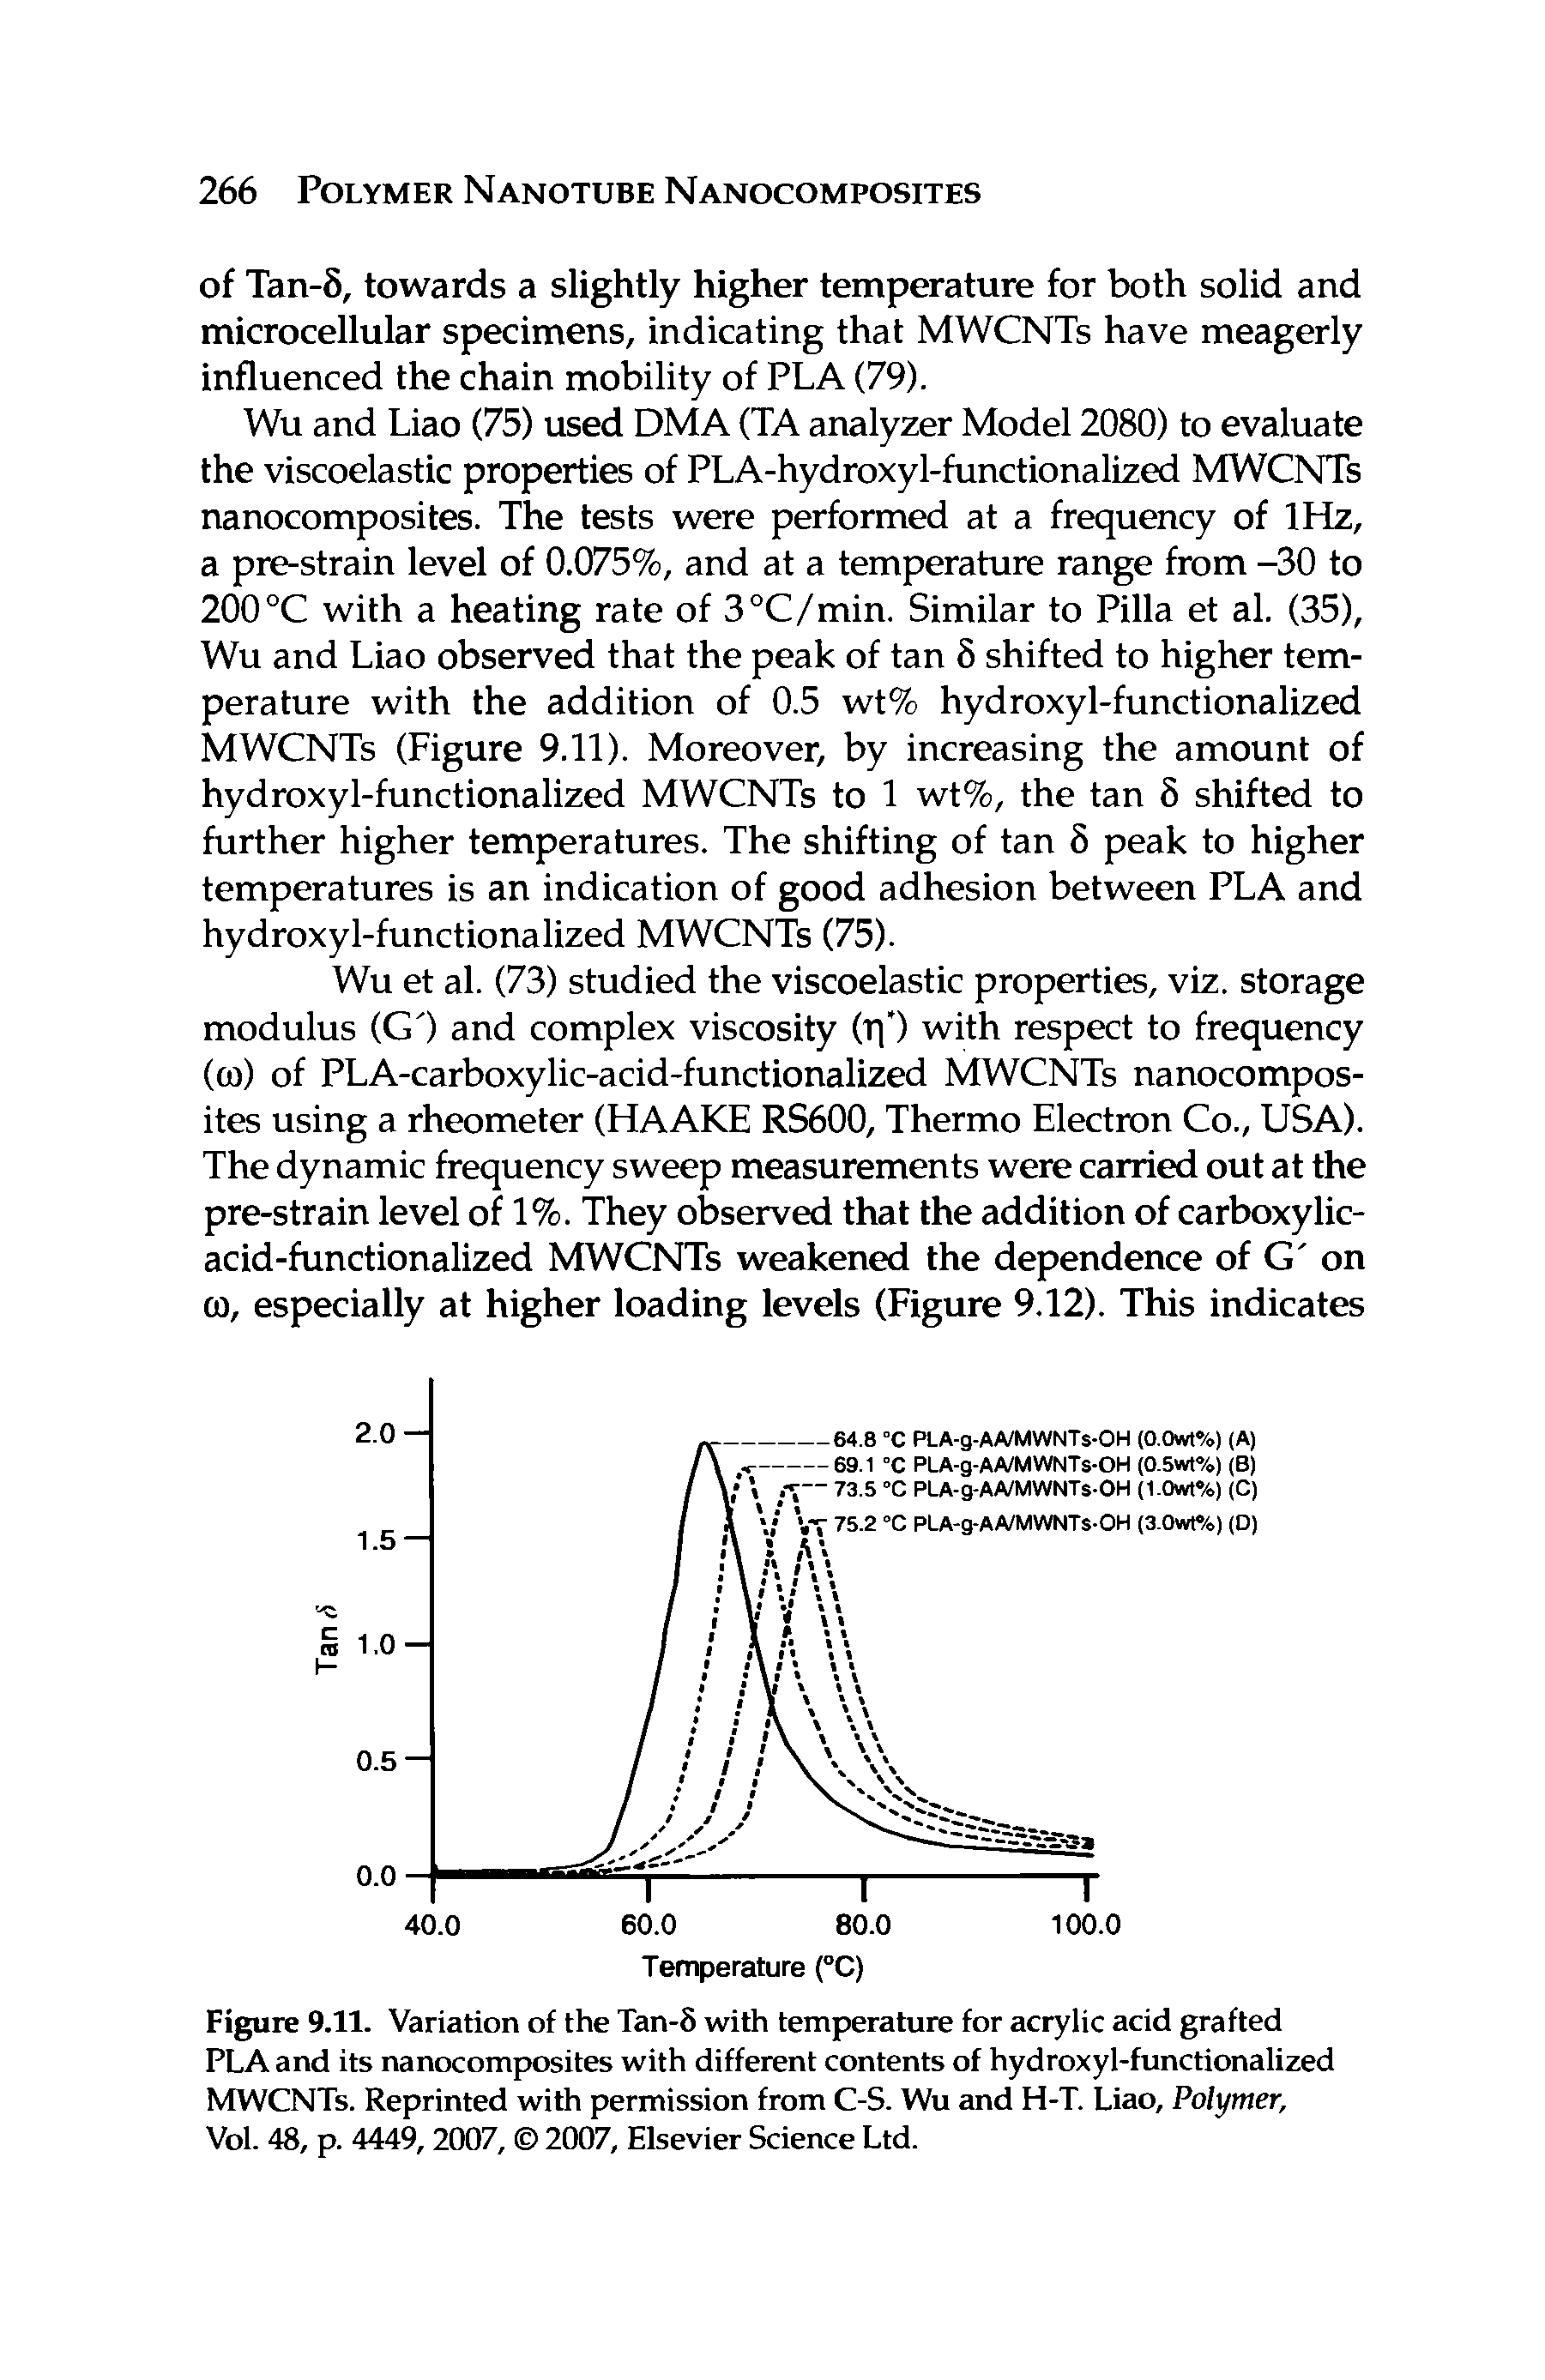 Figure 9.11. Variation of the Tan-8 with temperature for acrylic acid grafted PLA and its nanocomposites with different contents of hydroxyl-functionalized MWCNTs. Reprinted with permission from C-S. Wu and H-T. Liao, Polymer, Vol. 48, p. 4449, 2007, 2007, Elsevier Science Ltd.